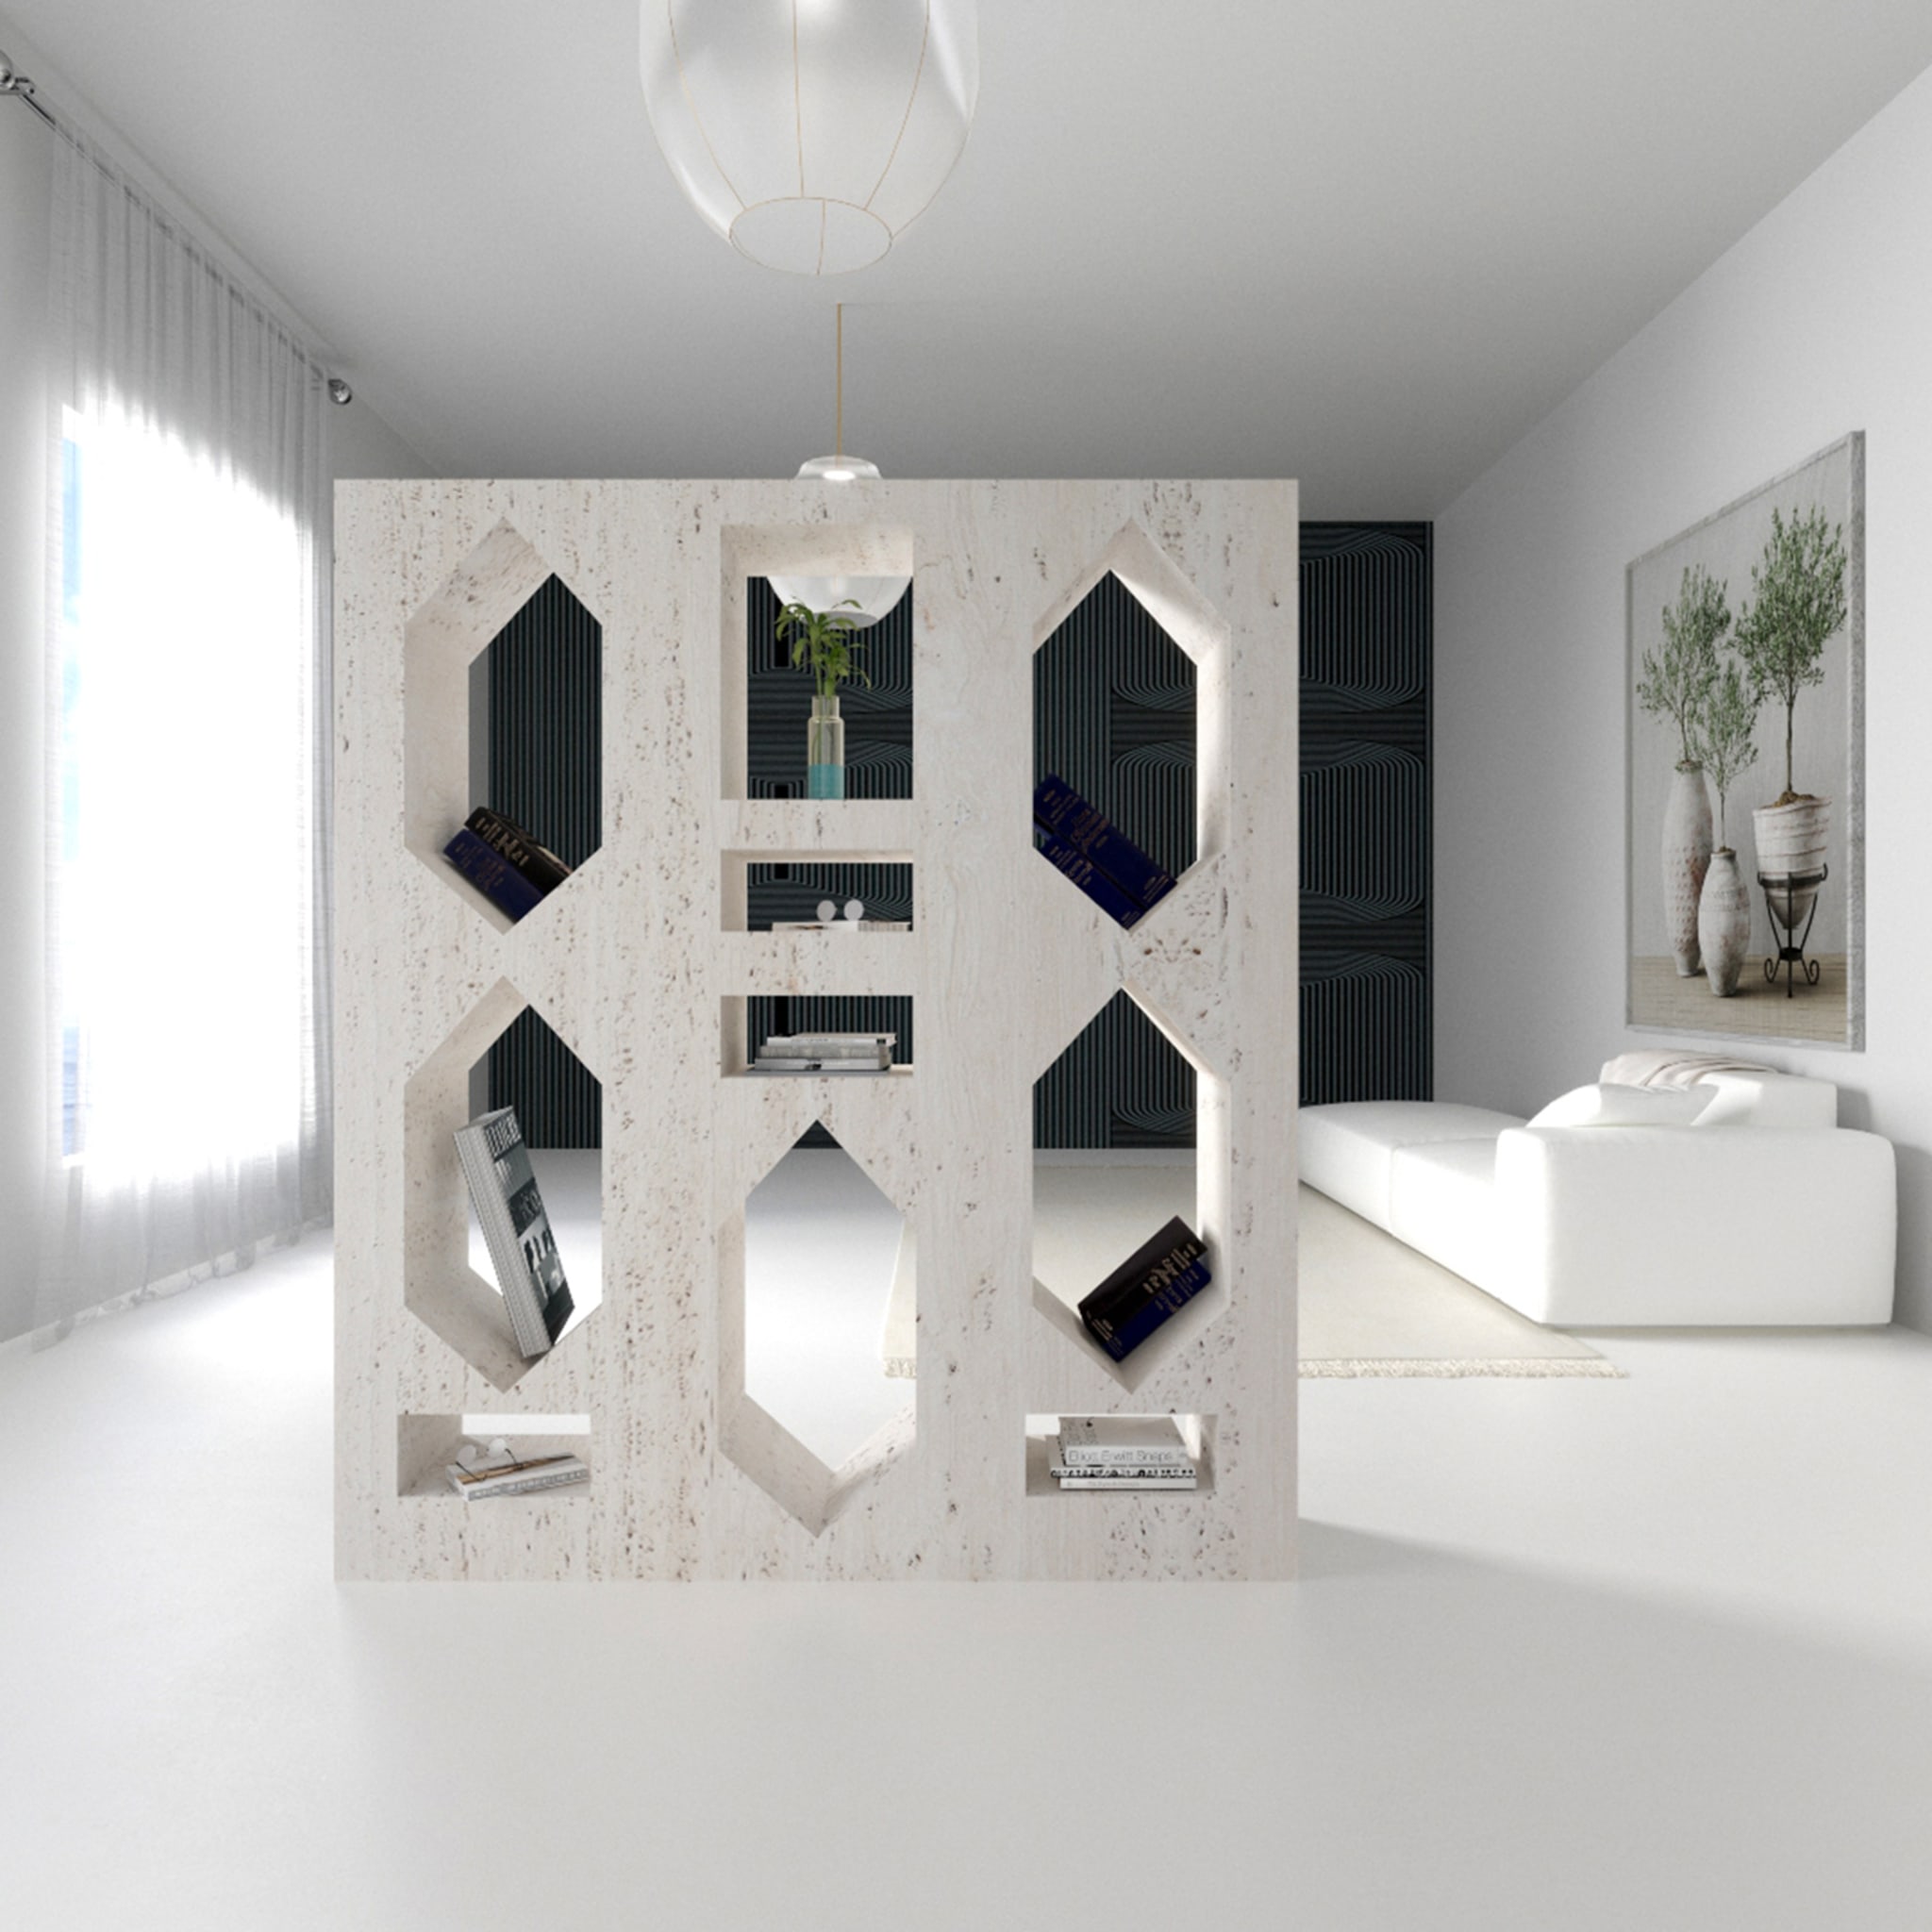 Ponti Bookcase in White Marble By Sissy Daniele - Alternative view 1